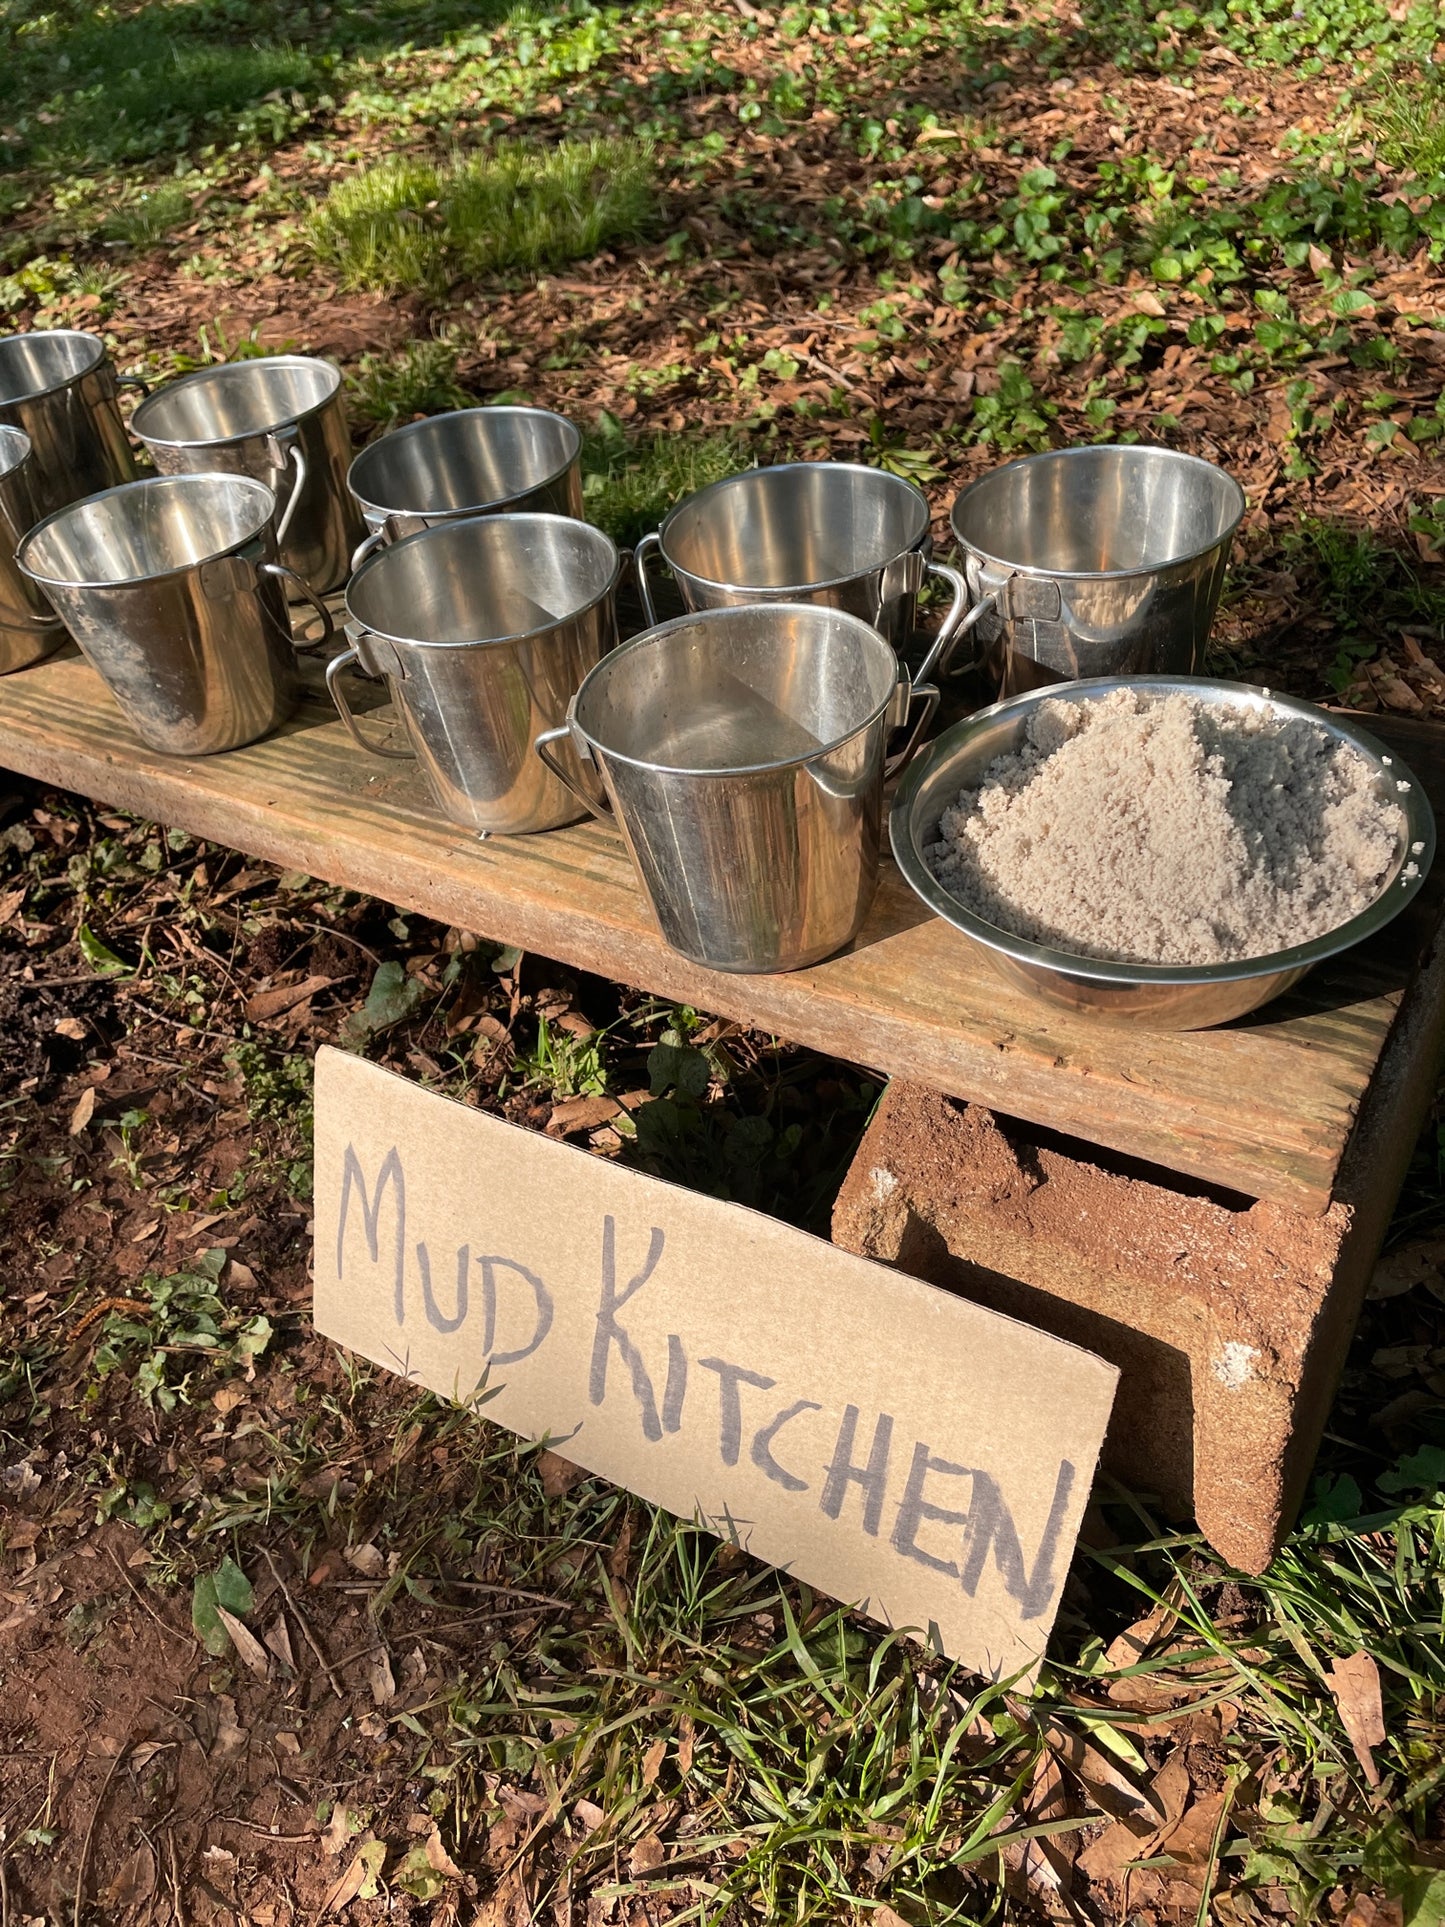 Mud pies are always a favorite for children to create, make, and imagine while making mud pies, mud soup, mud tea, and mud cupcakes. They will use water and dirt to make mud. They will forage for natural materials and ingredients. They'll mix and blend ingredients like little chefs and cooks. 